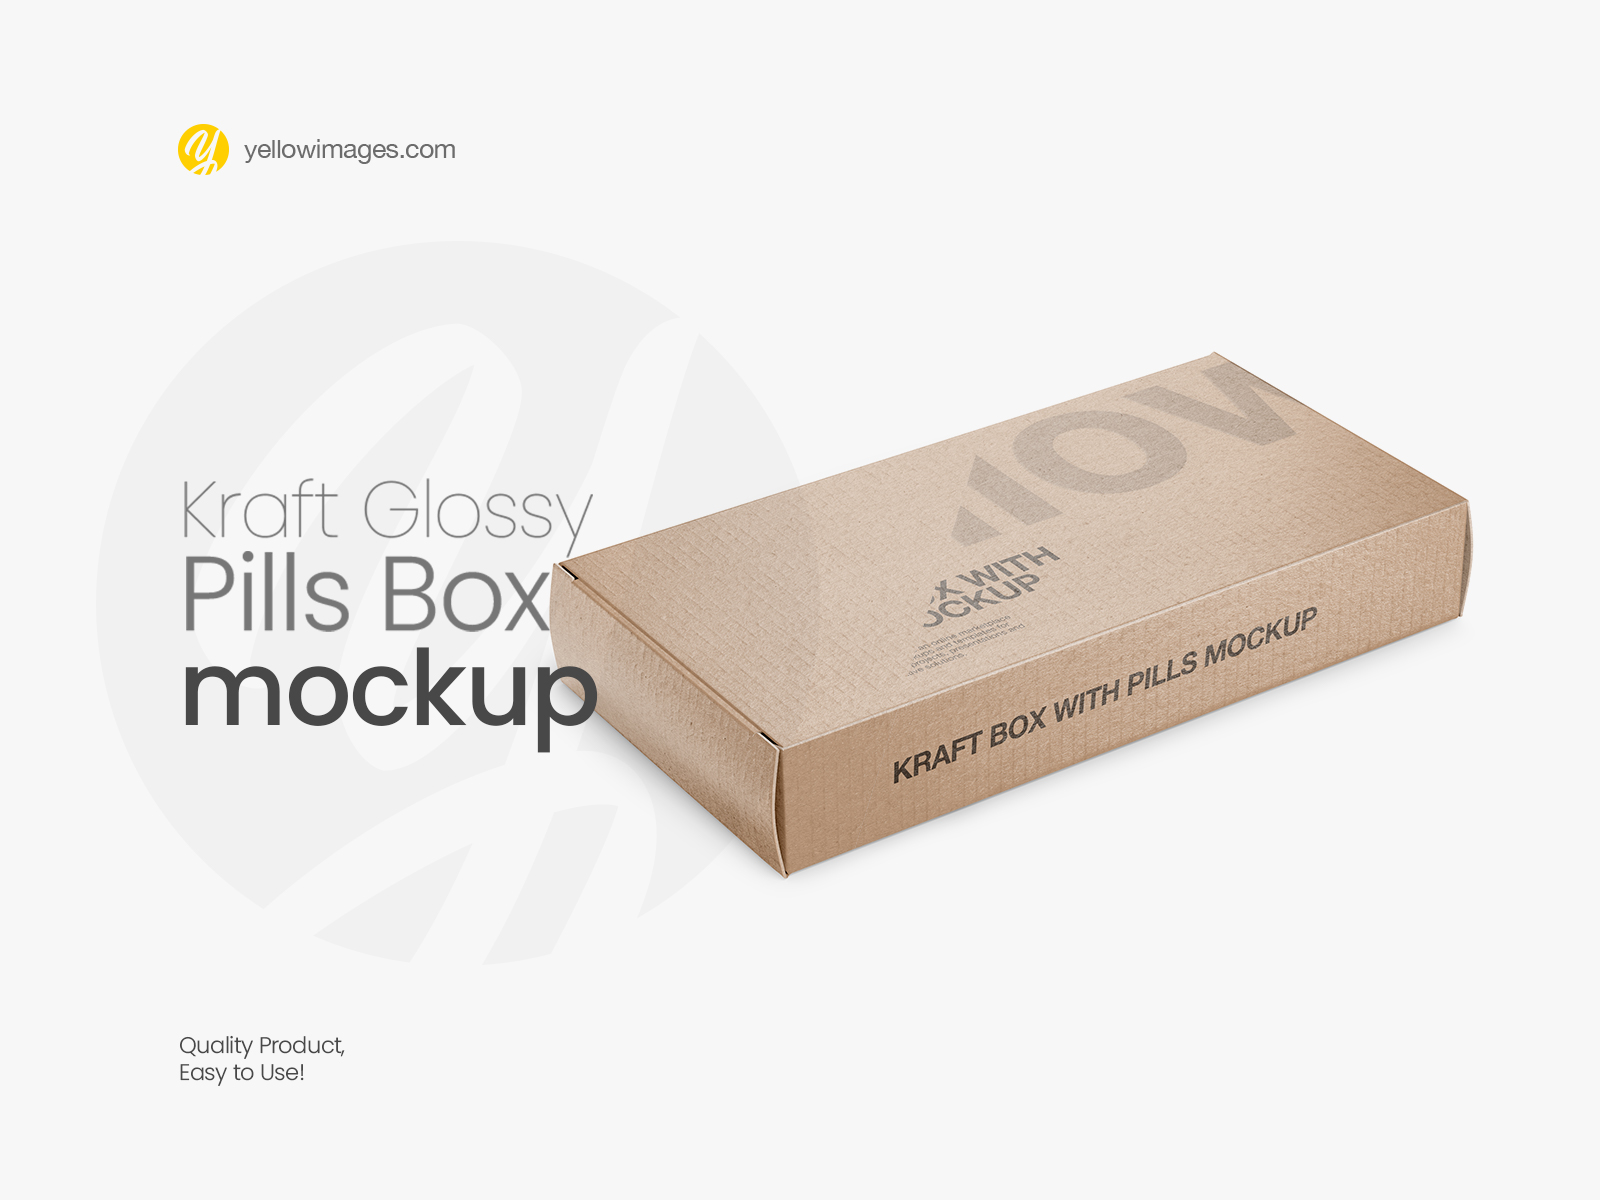 Download Mockup Box Download Free And Premium Packaging Mockup Psd Templates And Design Assets PSD Mockup Templates